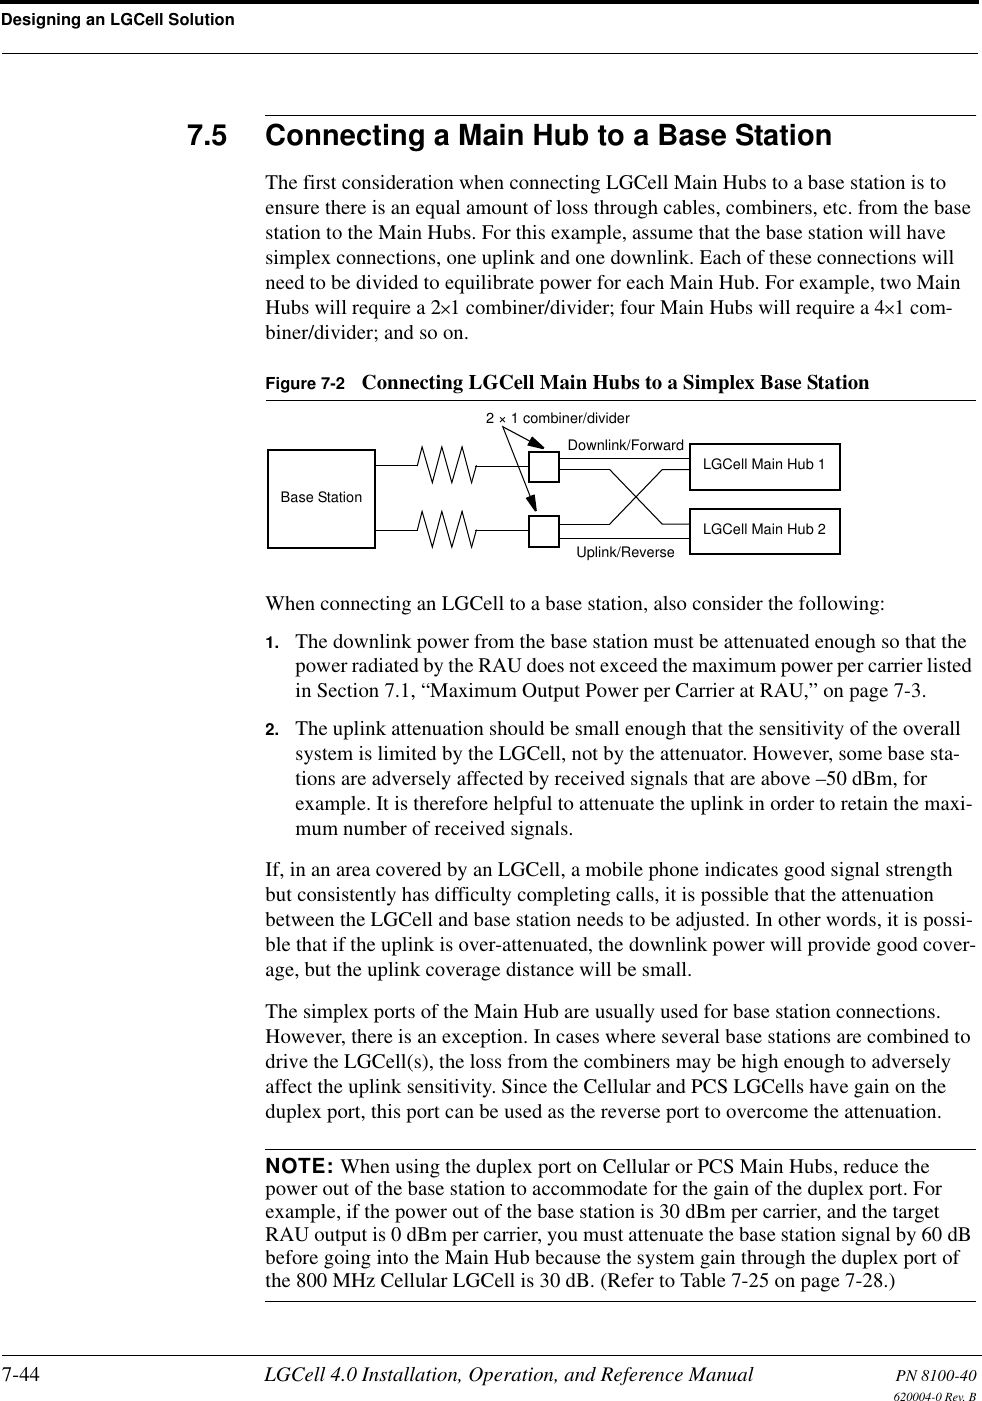 Designing an LGCell Solution7-44 LGCell 4.0 Installation, Operation, and Reference Manual PN 8100-40620004-0 Rev. B7.5 Connecting a Main Hub to a Base StationThe first consideration when connecting LGCell Main Hubs to a base station is to ensure there is an equal amount of loss through cables, combiners, etc. from the base station to the Main Hubs. For this example, assume that the base station will have simplex connections, one uplink and one downlink. Each of these connections will need to be divided to equilibrate power for each Main Hub. For example, two Main Hubs will require a 2×1 combiner/divider; four Main Hubs will require a 4×1 com-biner/divider; and so on.Figure 7-2 Connecting LGCell Main Hubs to a Simplex Base StationWhen connecting an LGCell to a base station, also consider the following:1. The downlink power from the base station must be attenuated enough so that the power radiated by the RAU does not exceed the maximum power per carrier listed in Section 7.1, “Maximum Output Power per Carrier at RAU,” on page 7-3.2. The uplink attenuation should be small enough that the sensitivity of the overall system is limited by the LGCell, not by the attenuator. However, some base sta-tions are adversely affected by received signals that are above –50 dBm, for example. It is therefore helpful to attenuate the uplink in order to retain the maxi-mum number of received signals.If, in an area covered by an LGCell, a mobile phone indicates good signal strength but consistently has difficulty completing calls, it is possible that the attenuation between the LGCell and base station needs to be adjusted. In other words, it is possi-ble that if the uplink is over-attenuated, the downlink power will provide good cover-age, but the uplink coverage distance will be small.The simplex ports of the Main Hub are usually used for base station connections. However, there is an exception. In cases where several base stations are combined to drive the LGCell(s), the loss from the combiners may be high enough to adversely affect the uplink sensitivity. Since the Cellular and PCS LGCells have gain on the duplex port, this port can be used as the reverse port to overcome the attenuation.NOTE: When using the duplex port on Cellular or PCS Main Hubs, reduce the power out of the base station to accommodate for the gain of the duplex port. For example, if the power out of the base station is 30 dBm per carrier, and the target RAU output is 0 dBm per carrier, you must attenuate the base station signal by 60 dB before going into the Main Hub because the system gain through the duplex port of the 800 MHz Cellular LGCell is 30 dB. (Refer to Table 7-25 on page 7-28.)Base Station2 × 1 combiner/dividerDownlink/ForwardLGCell Main Hub 1LGCell Main Hub 2Uplink/Reverse